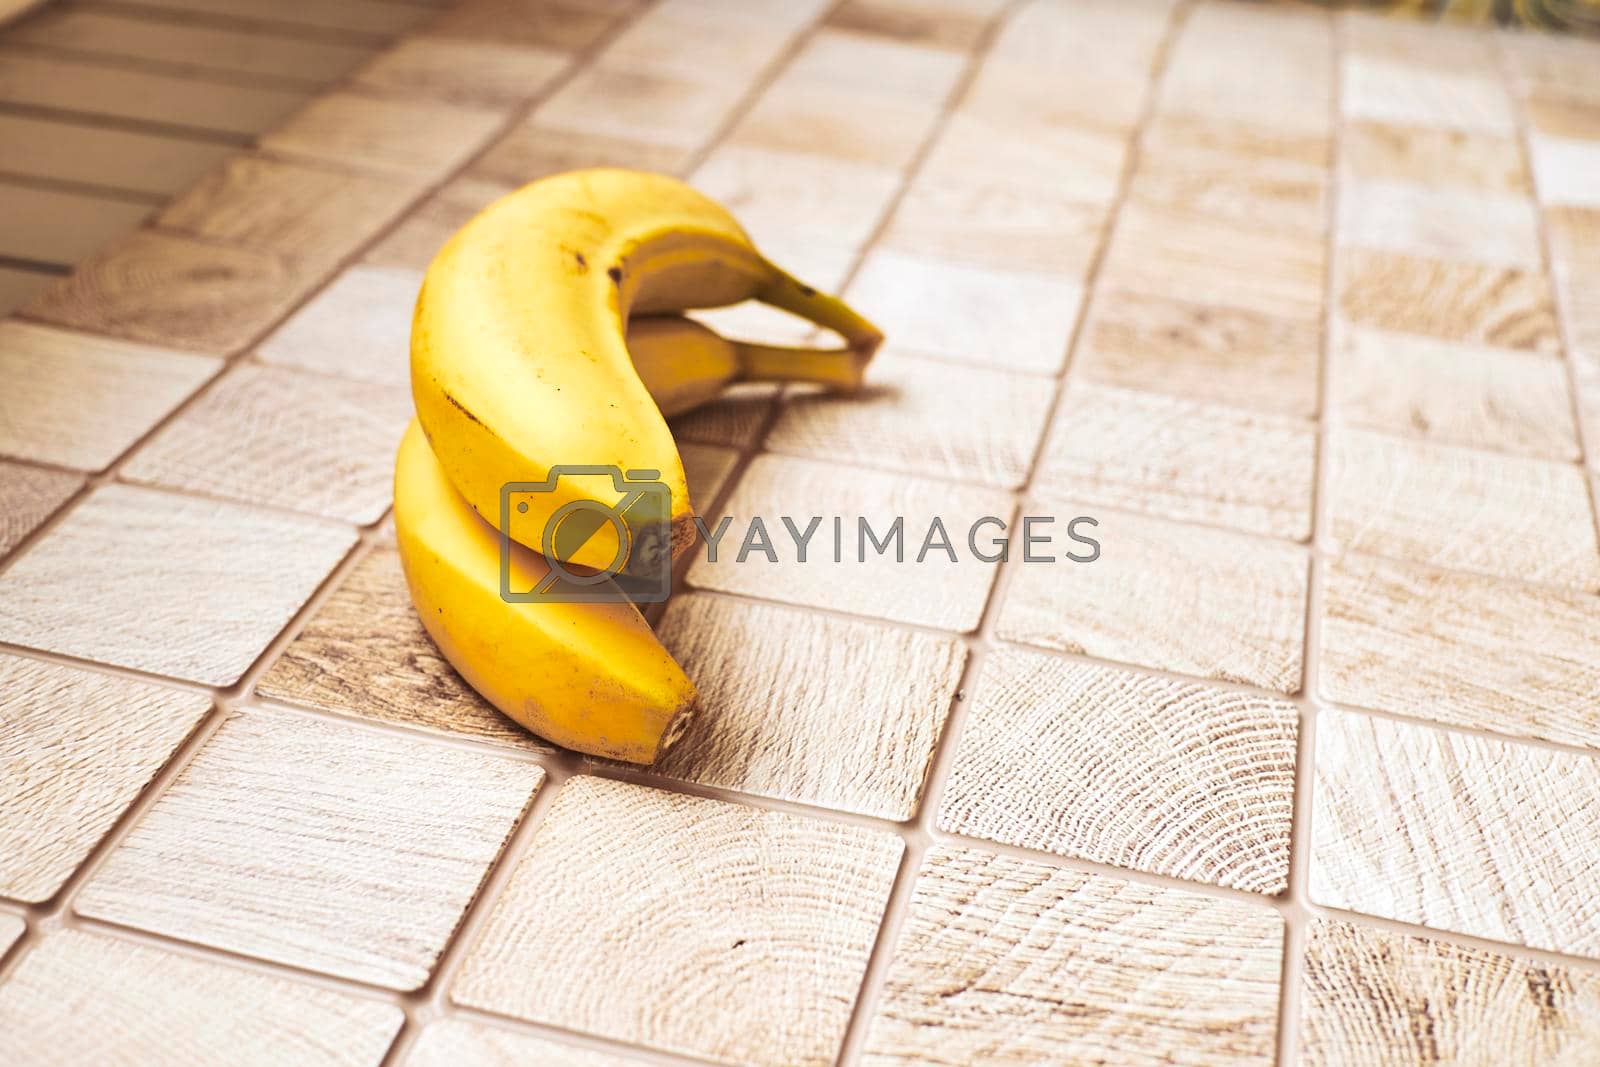 Royalty free image of Two ripe bananas on a checkered wooden surface by jovani68